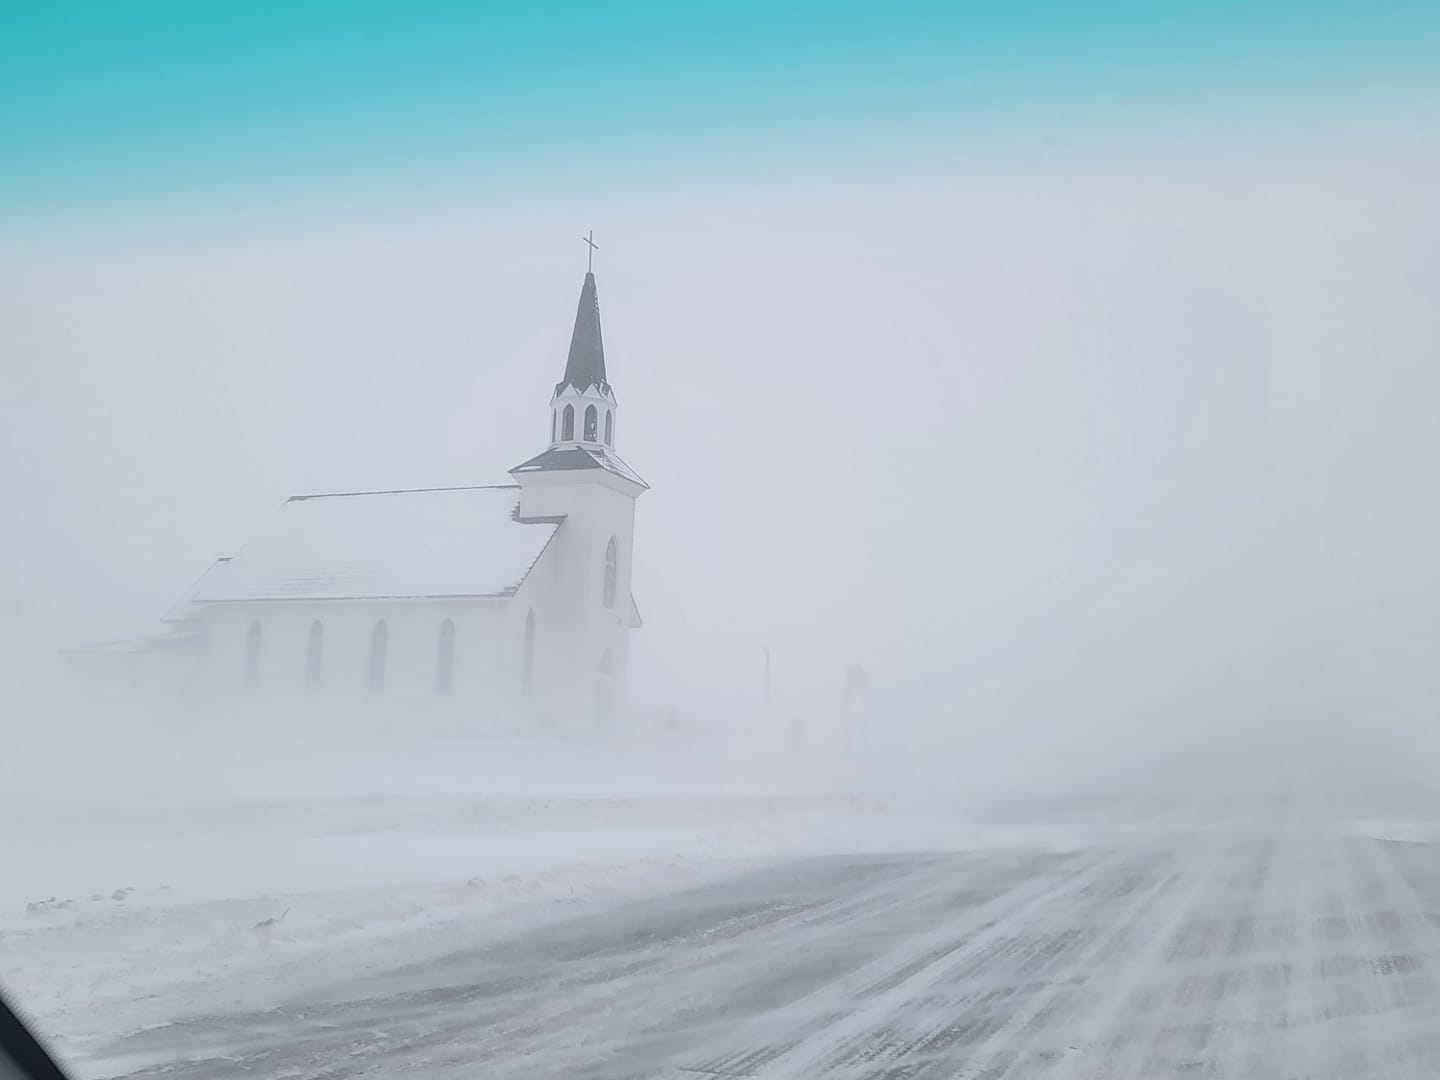 White country Christian church near a road. Snow is drifting so much you can barely see the church, and cannot see far down the road.